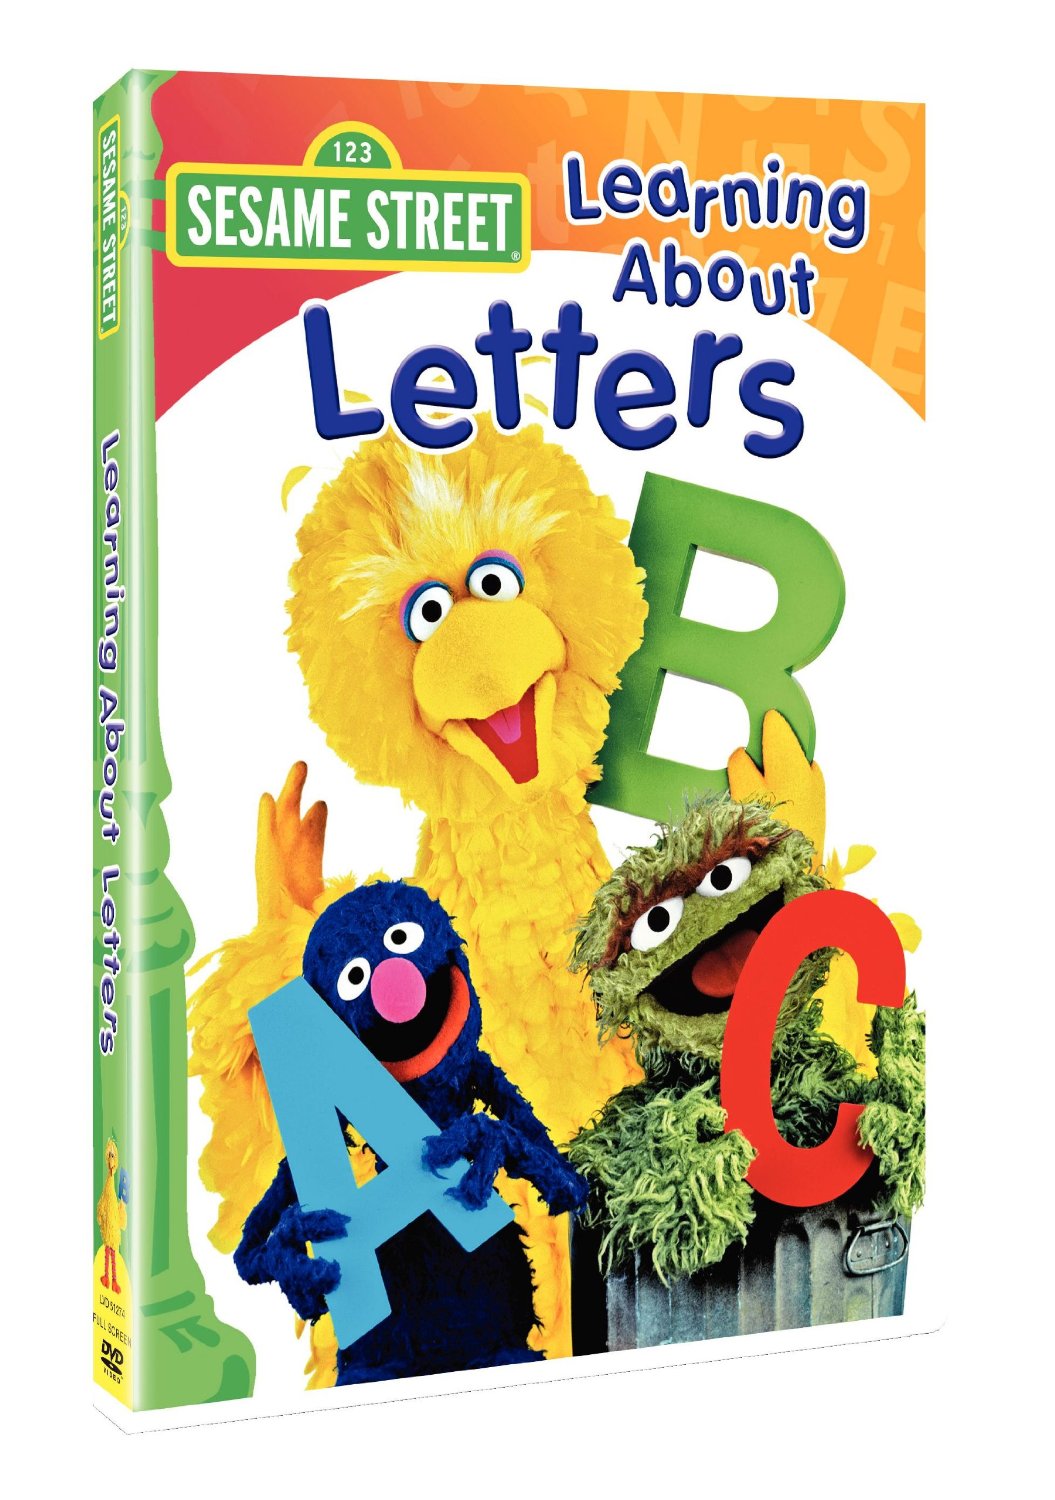 Sesame Street - Learning About Letters DVD $5 (Reg $7.79) + Free